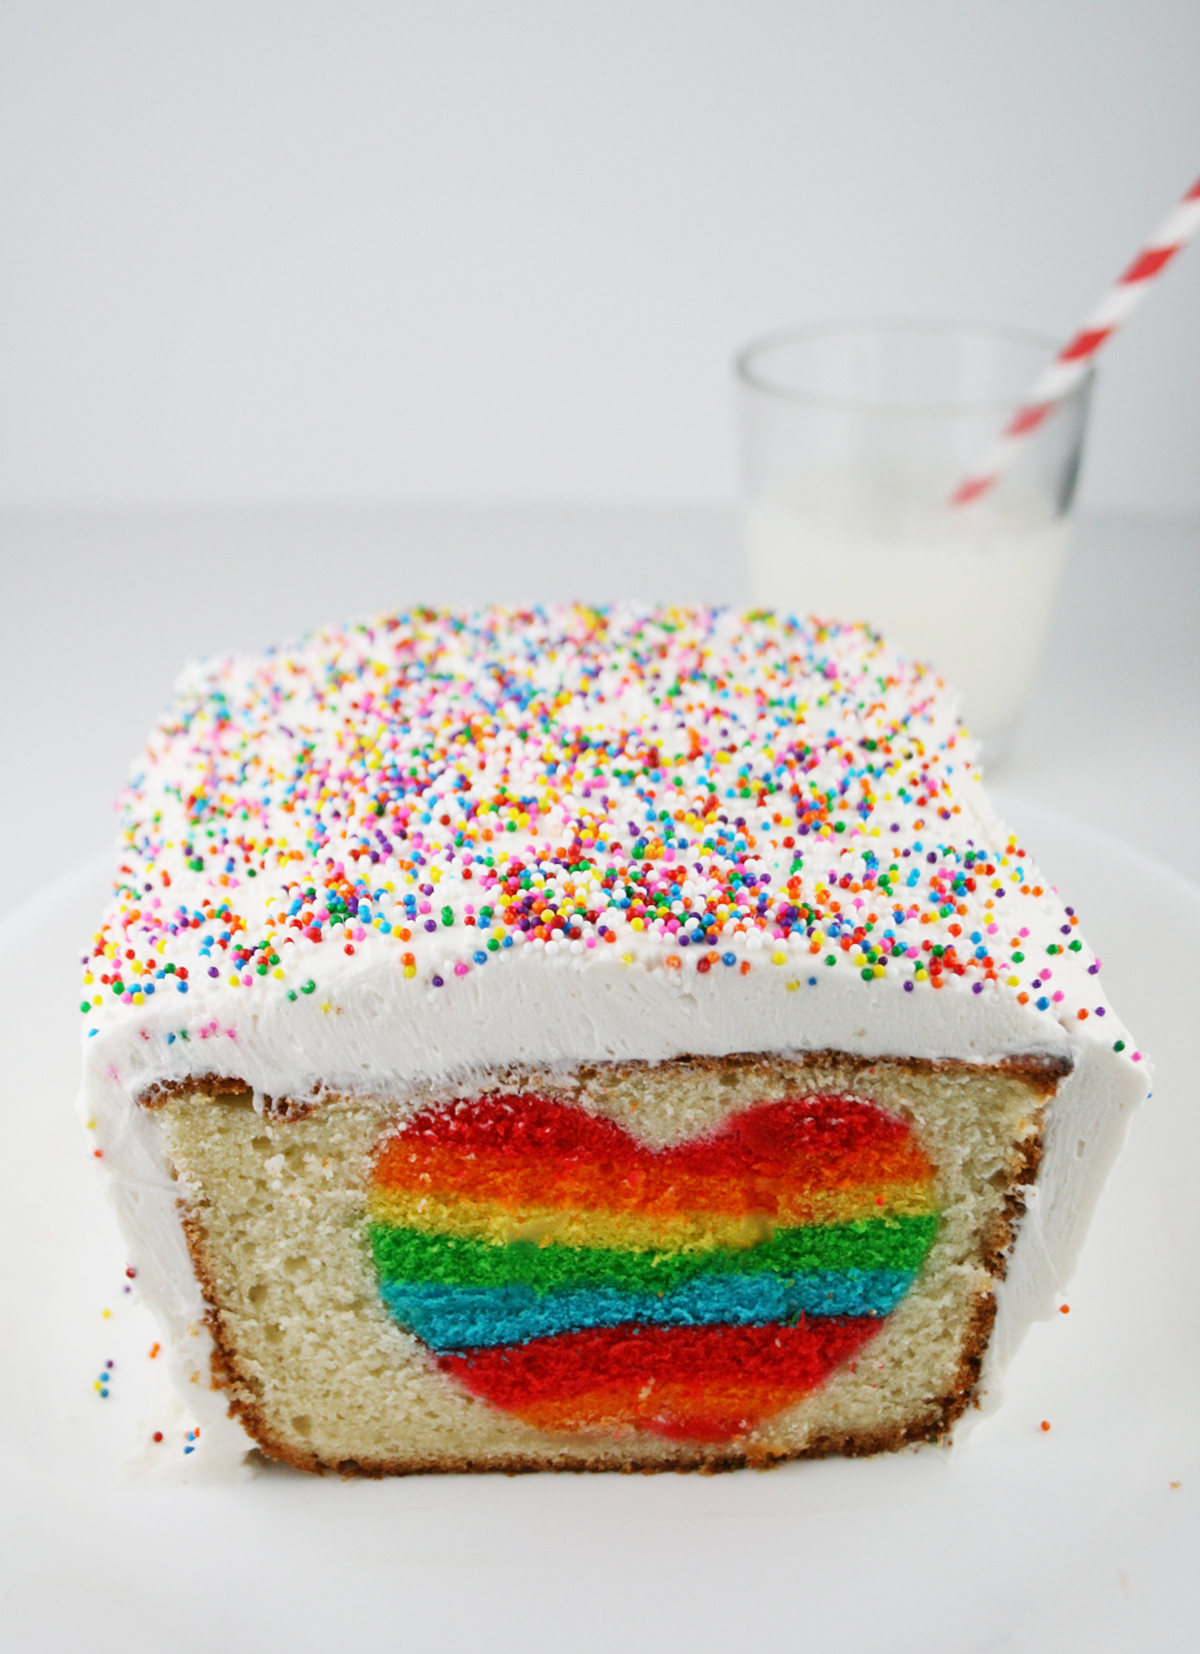 The coolest rainbow cake for a birthday party.